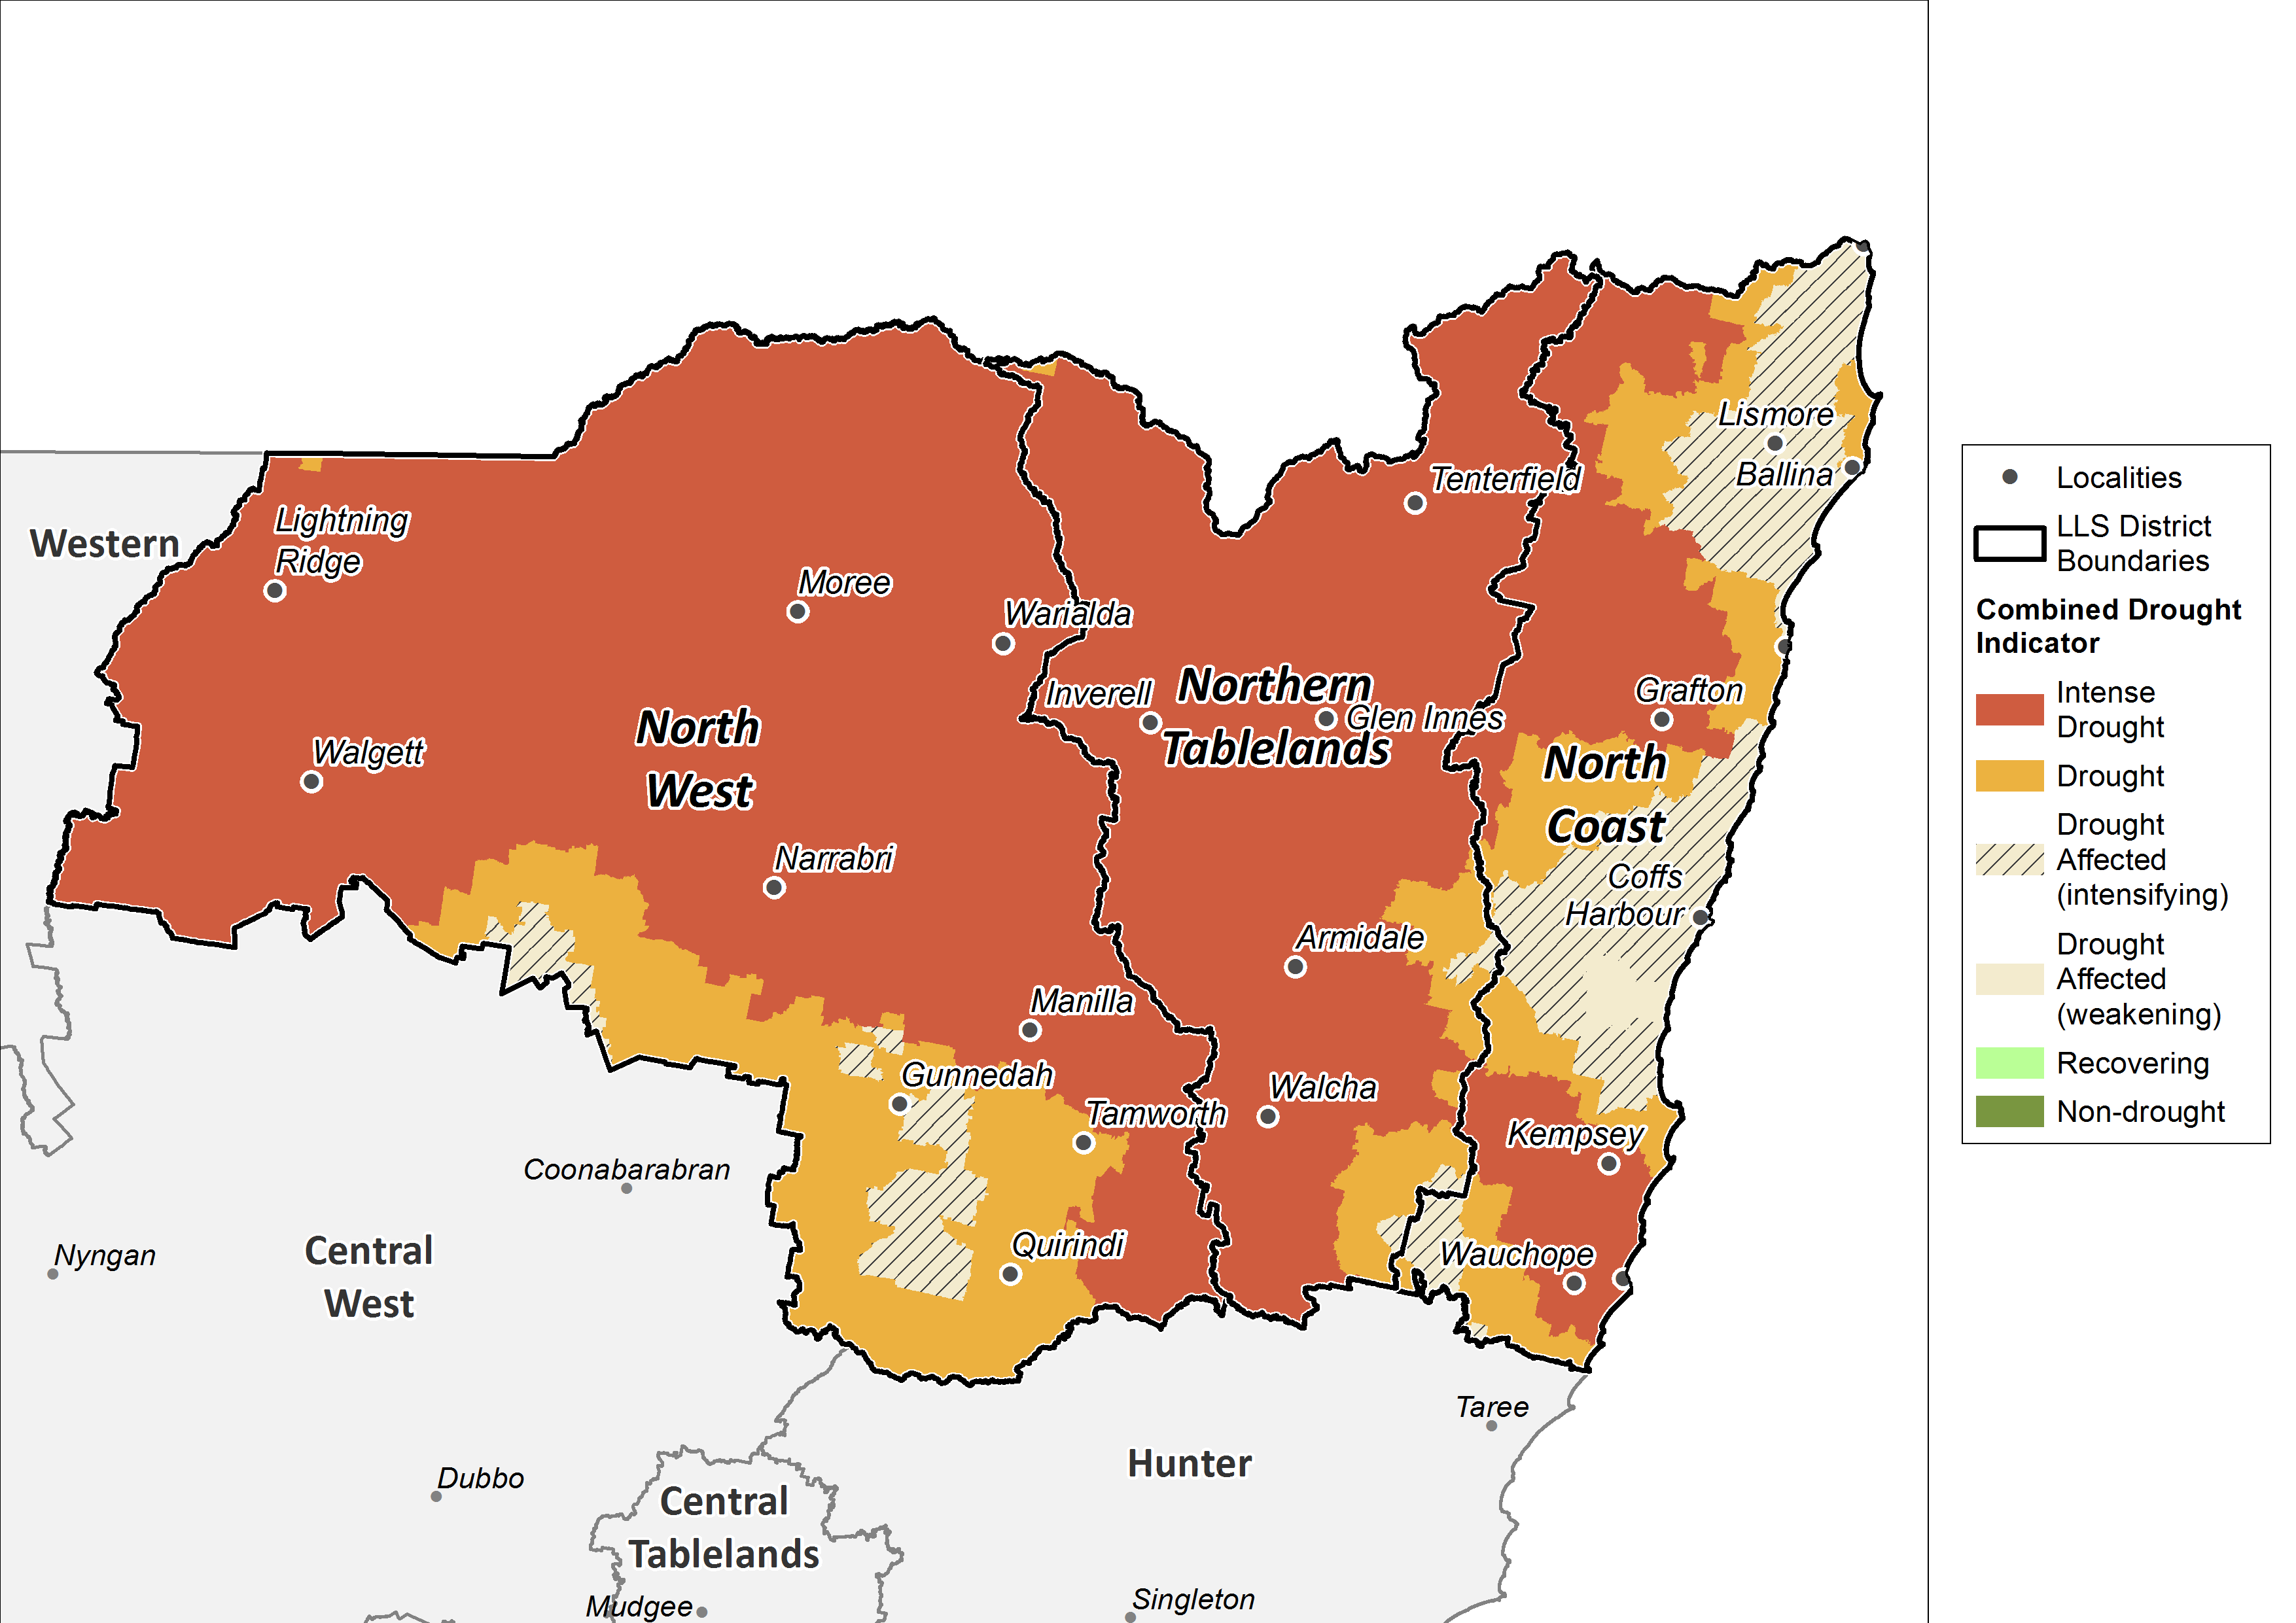 For an accessible explanation of this map/graph contact the author seasonal.conditions@dpi.nsw.gov.au